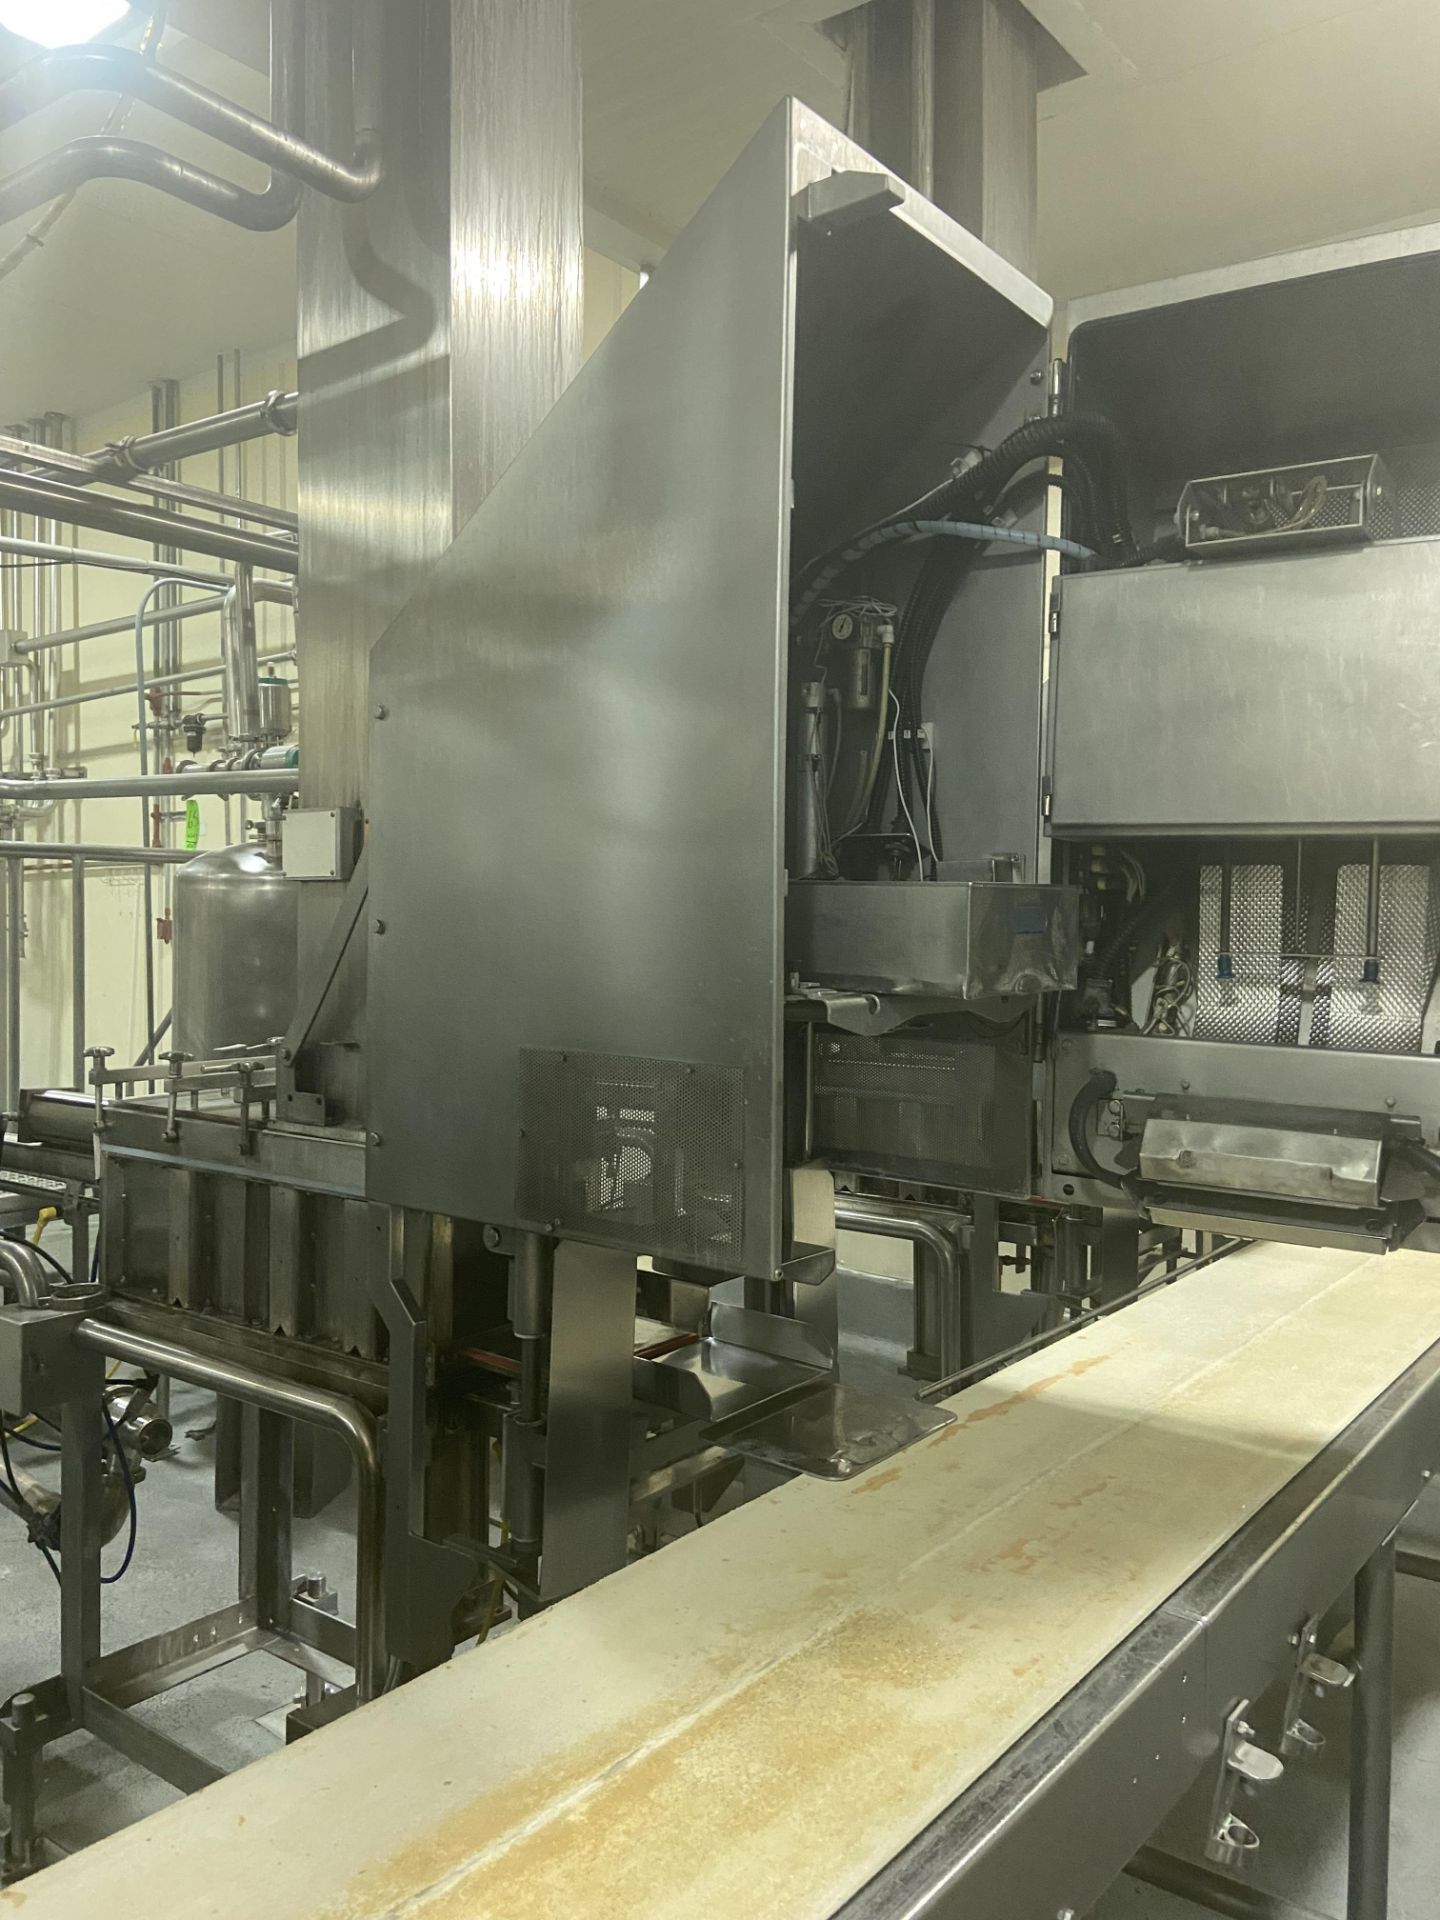 Stoelting (Relco)S/S Cheese Blocker with Cyrovac CL20 Bagger, M/N C120, S/N 01104, with - Image 7 of 12